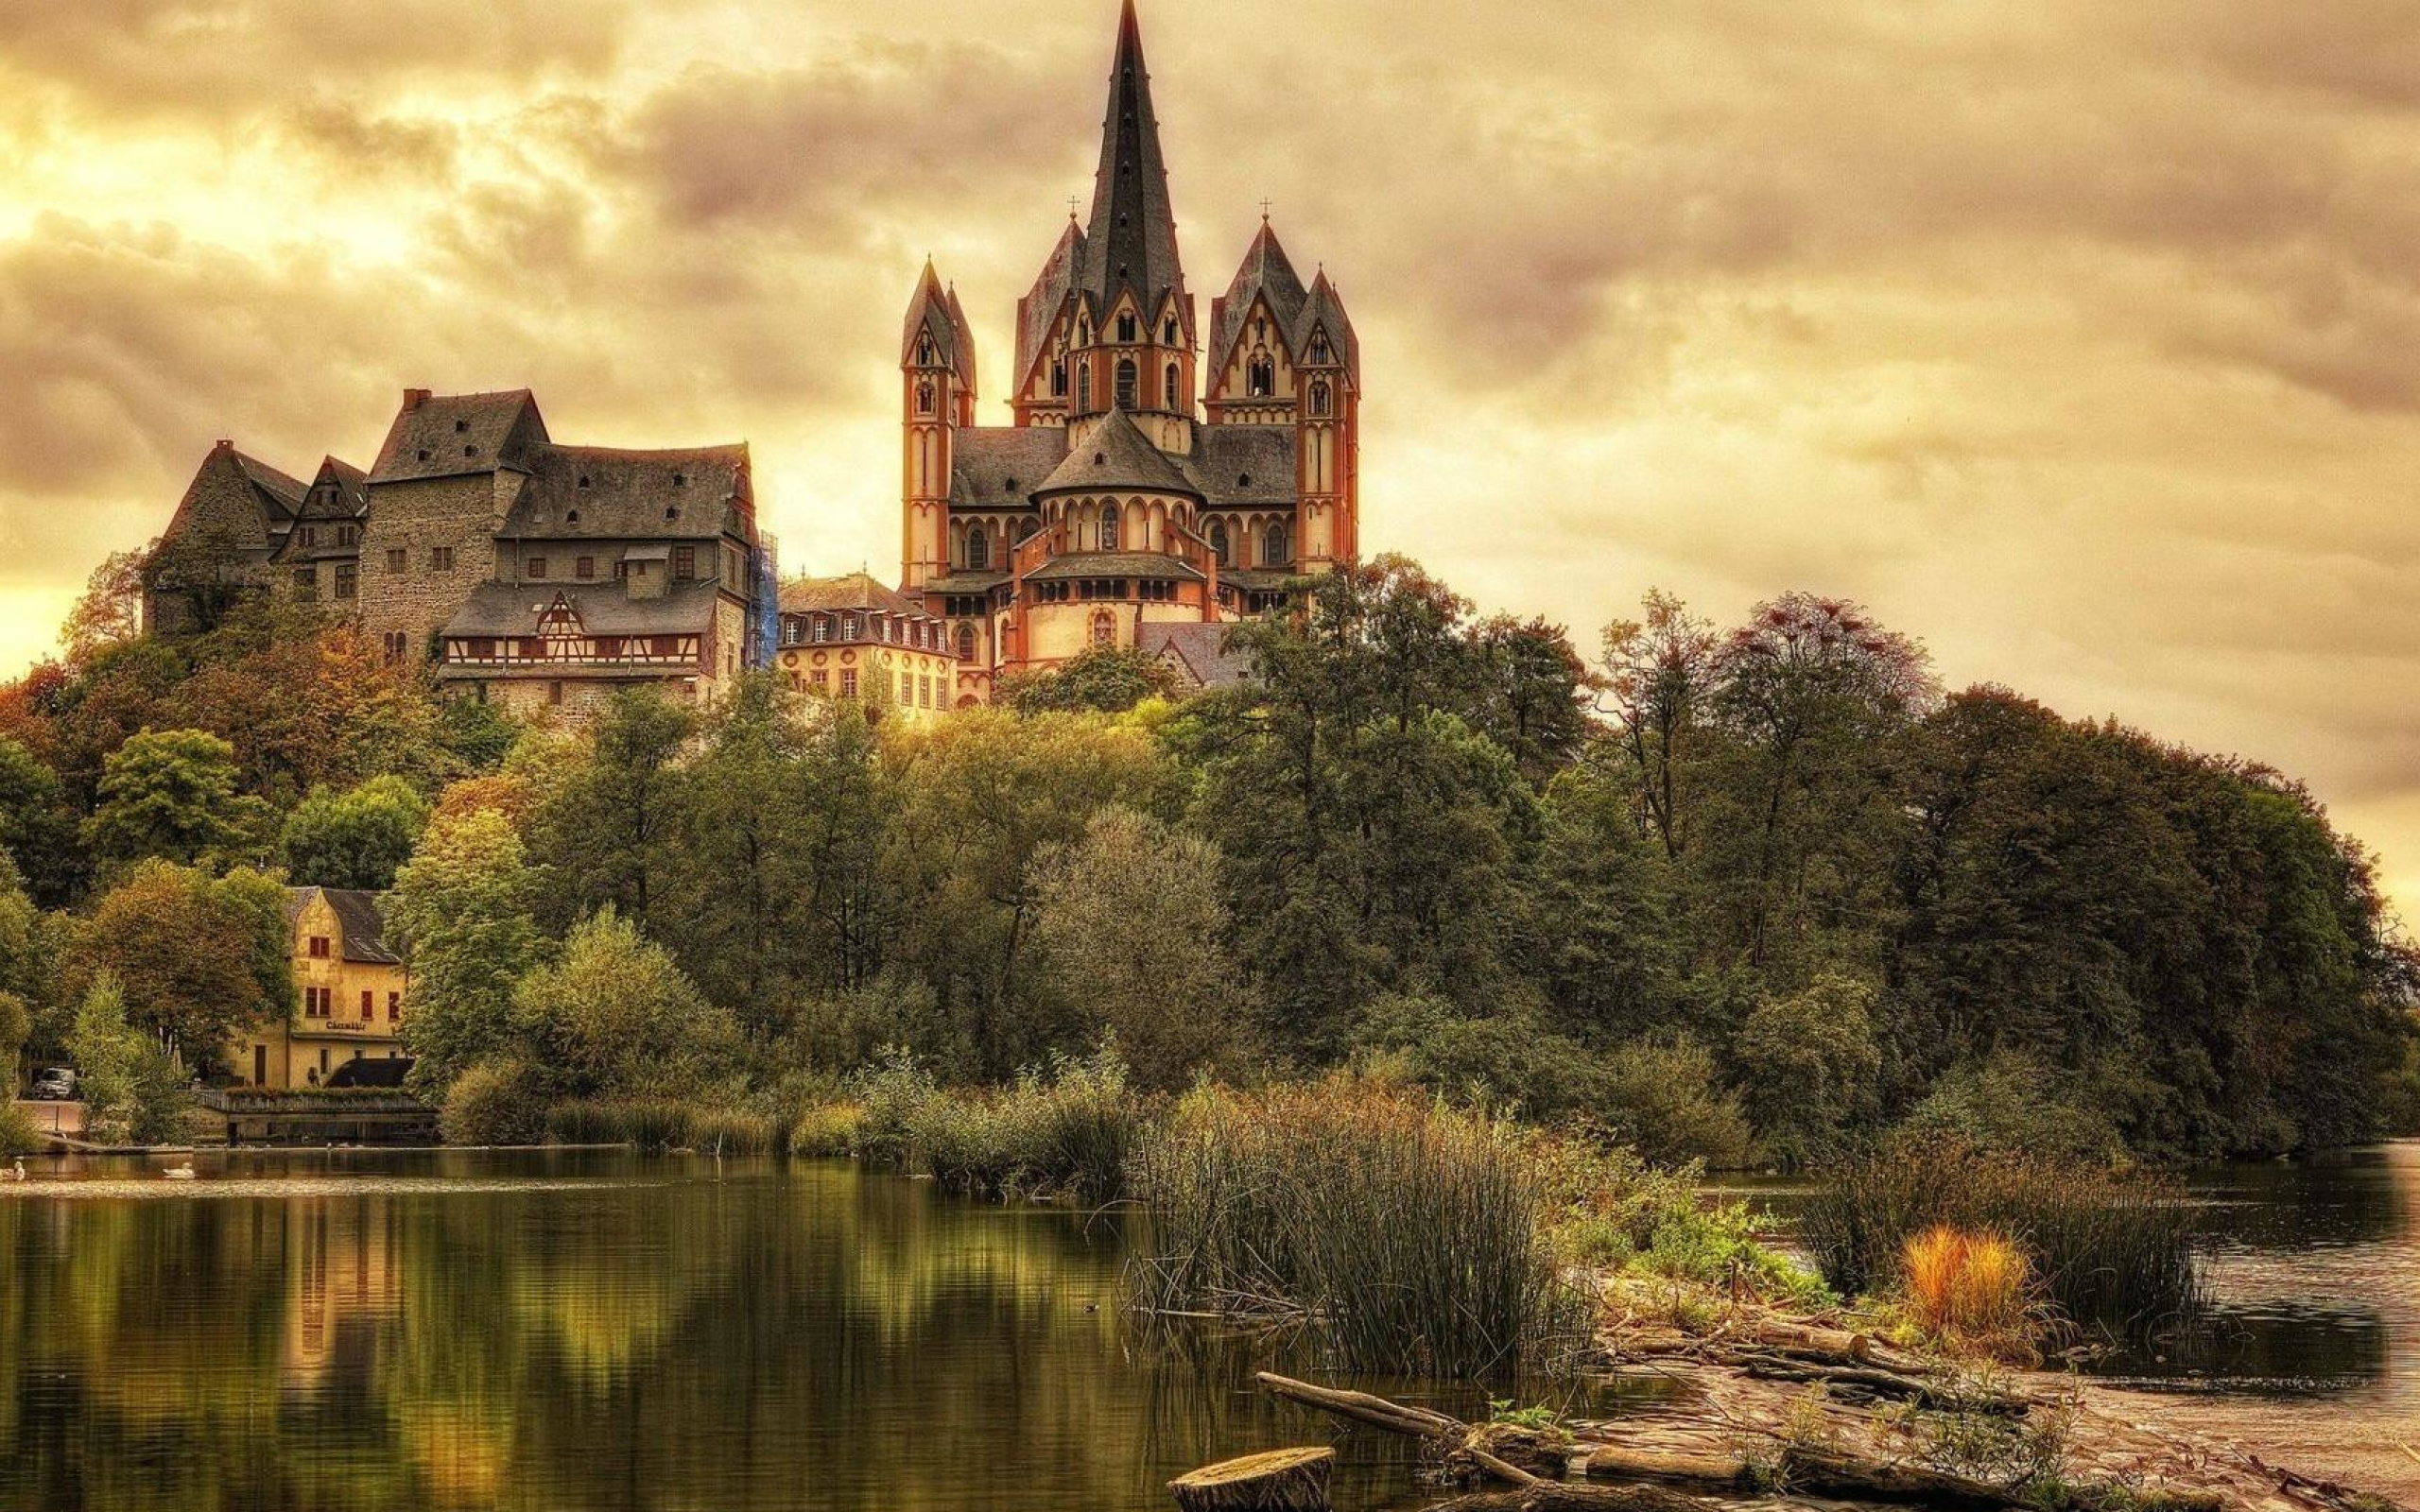 Ancient Limburgsky cathedral by the lake, Germany